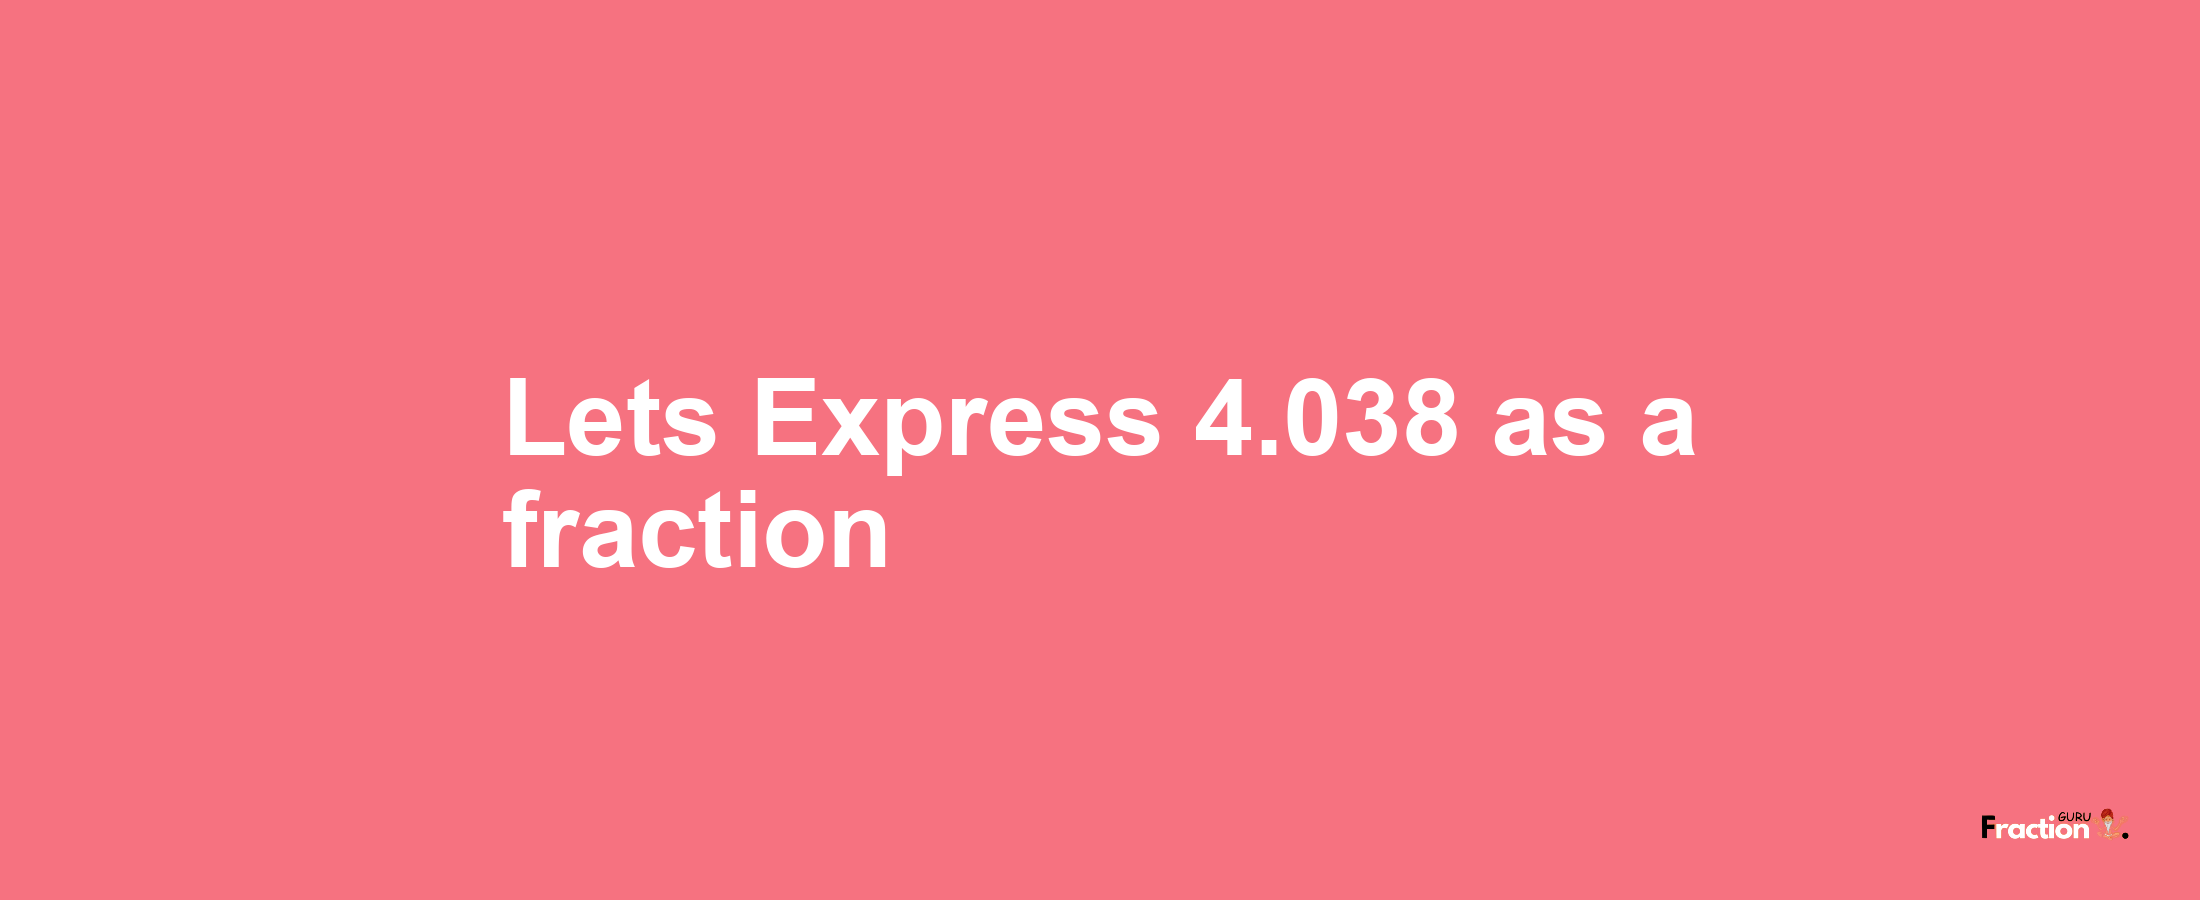 Lets Express 4.038 as afraction